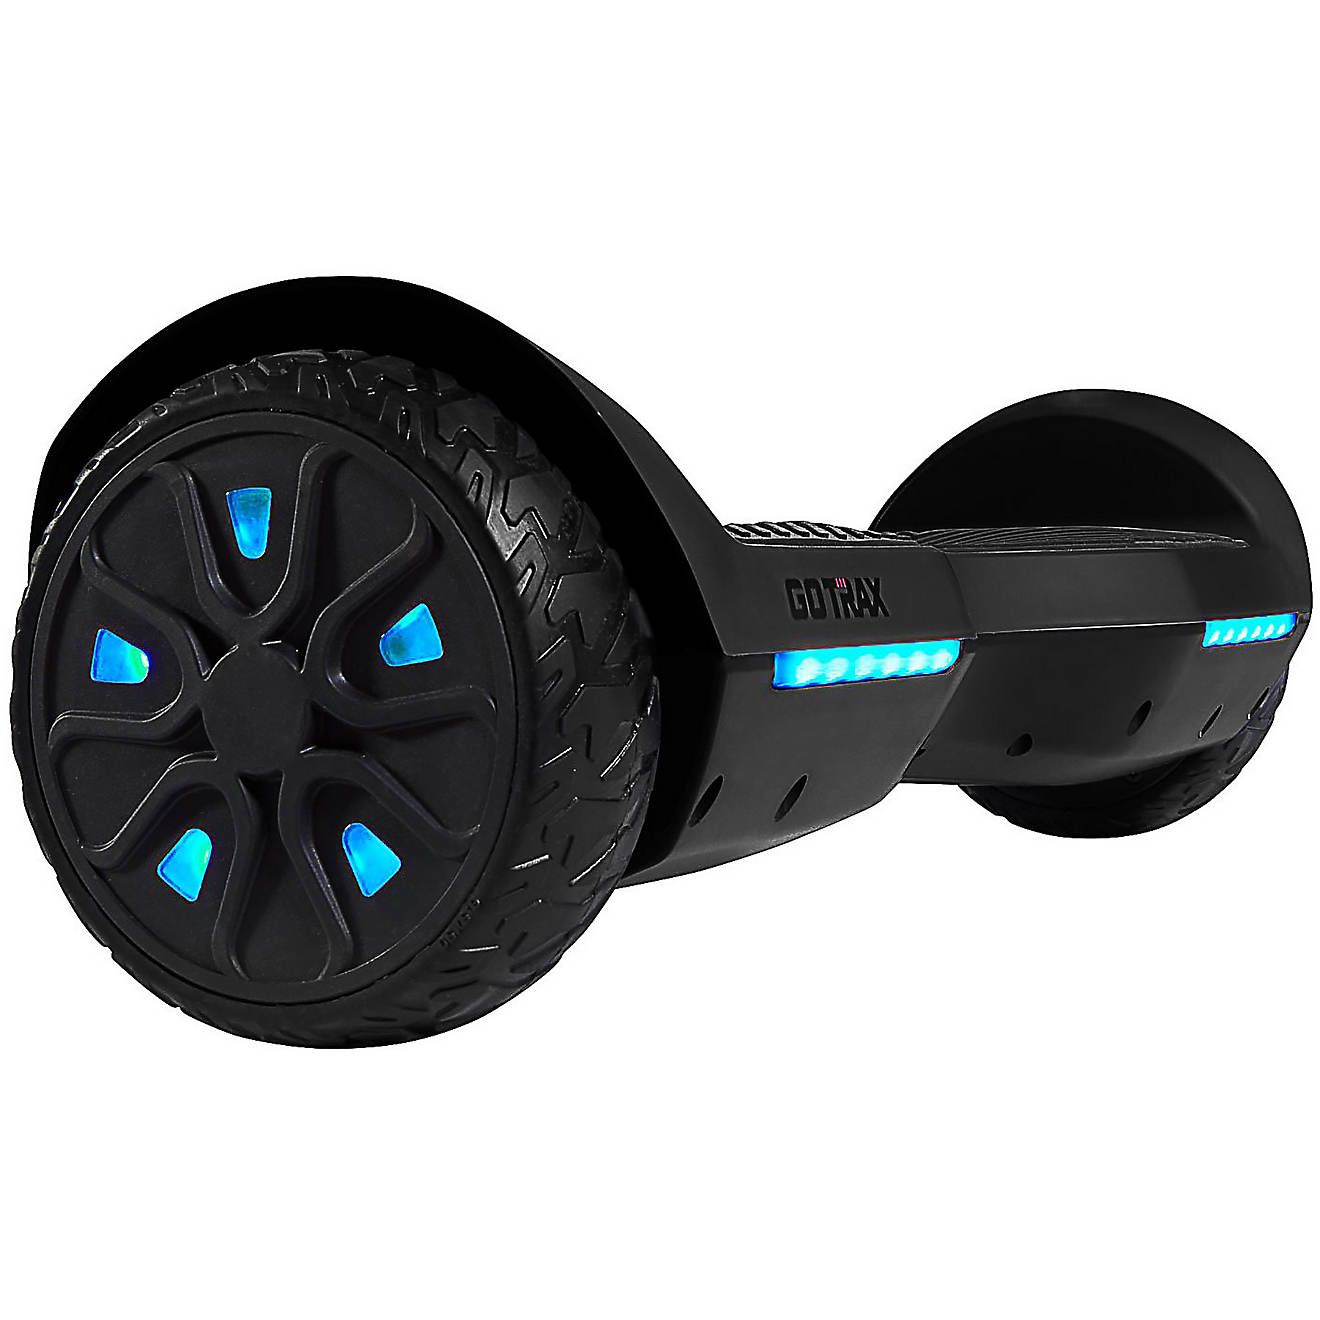 GOTRAX SRX A6 Bluetooth Hoverboard | Academy Sports + Outdoor Affiliate